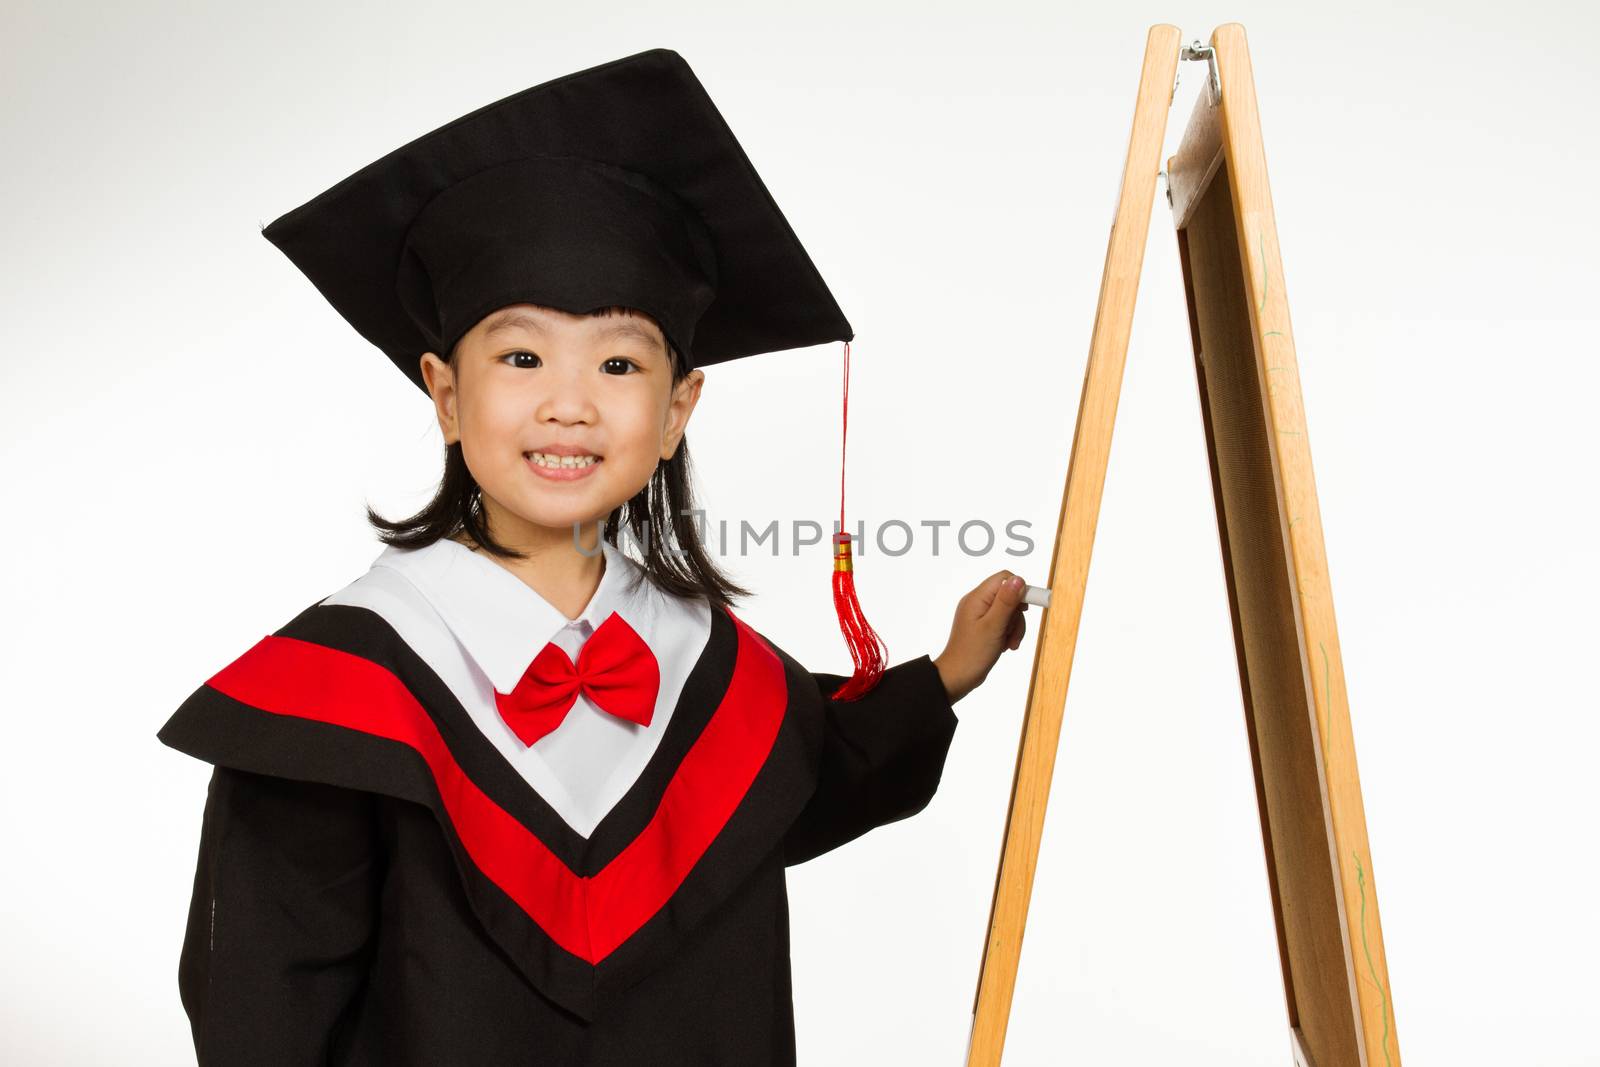 Asian Chinese children in graduation gown againts blackboard or chalkboard with formulas in plain isolated white background.